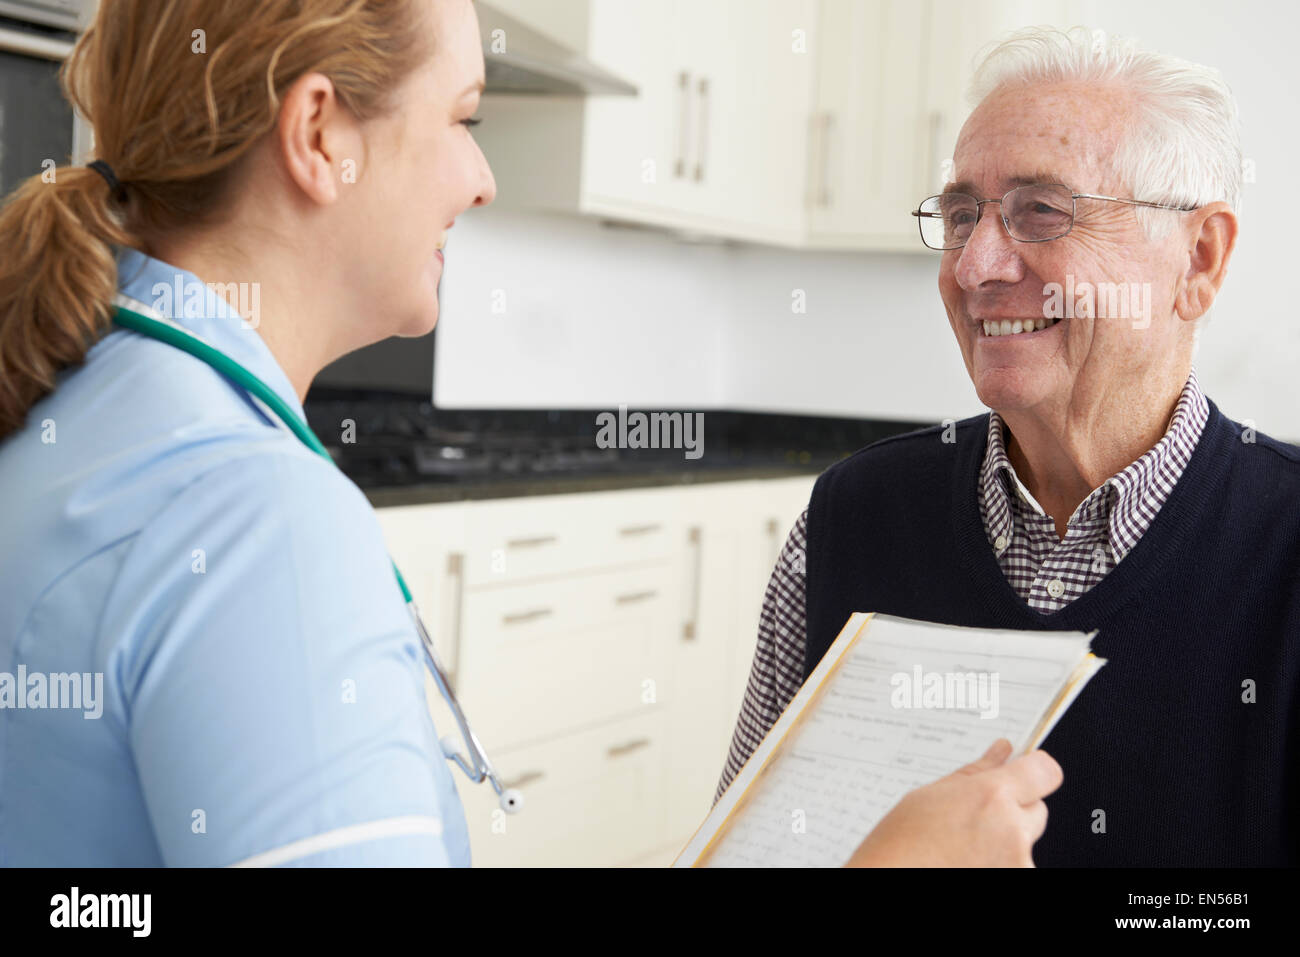 Nurse Discussing Medical Record With Senior Male Patient Stock Photo